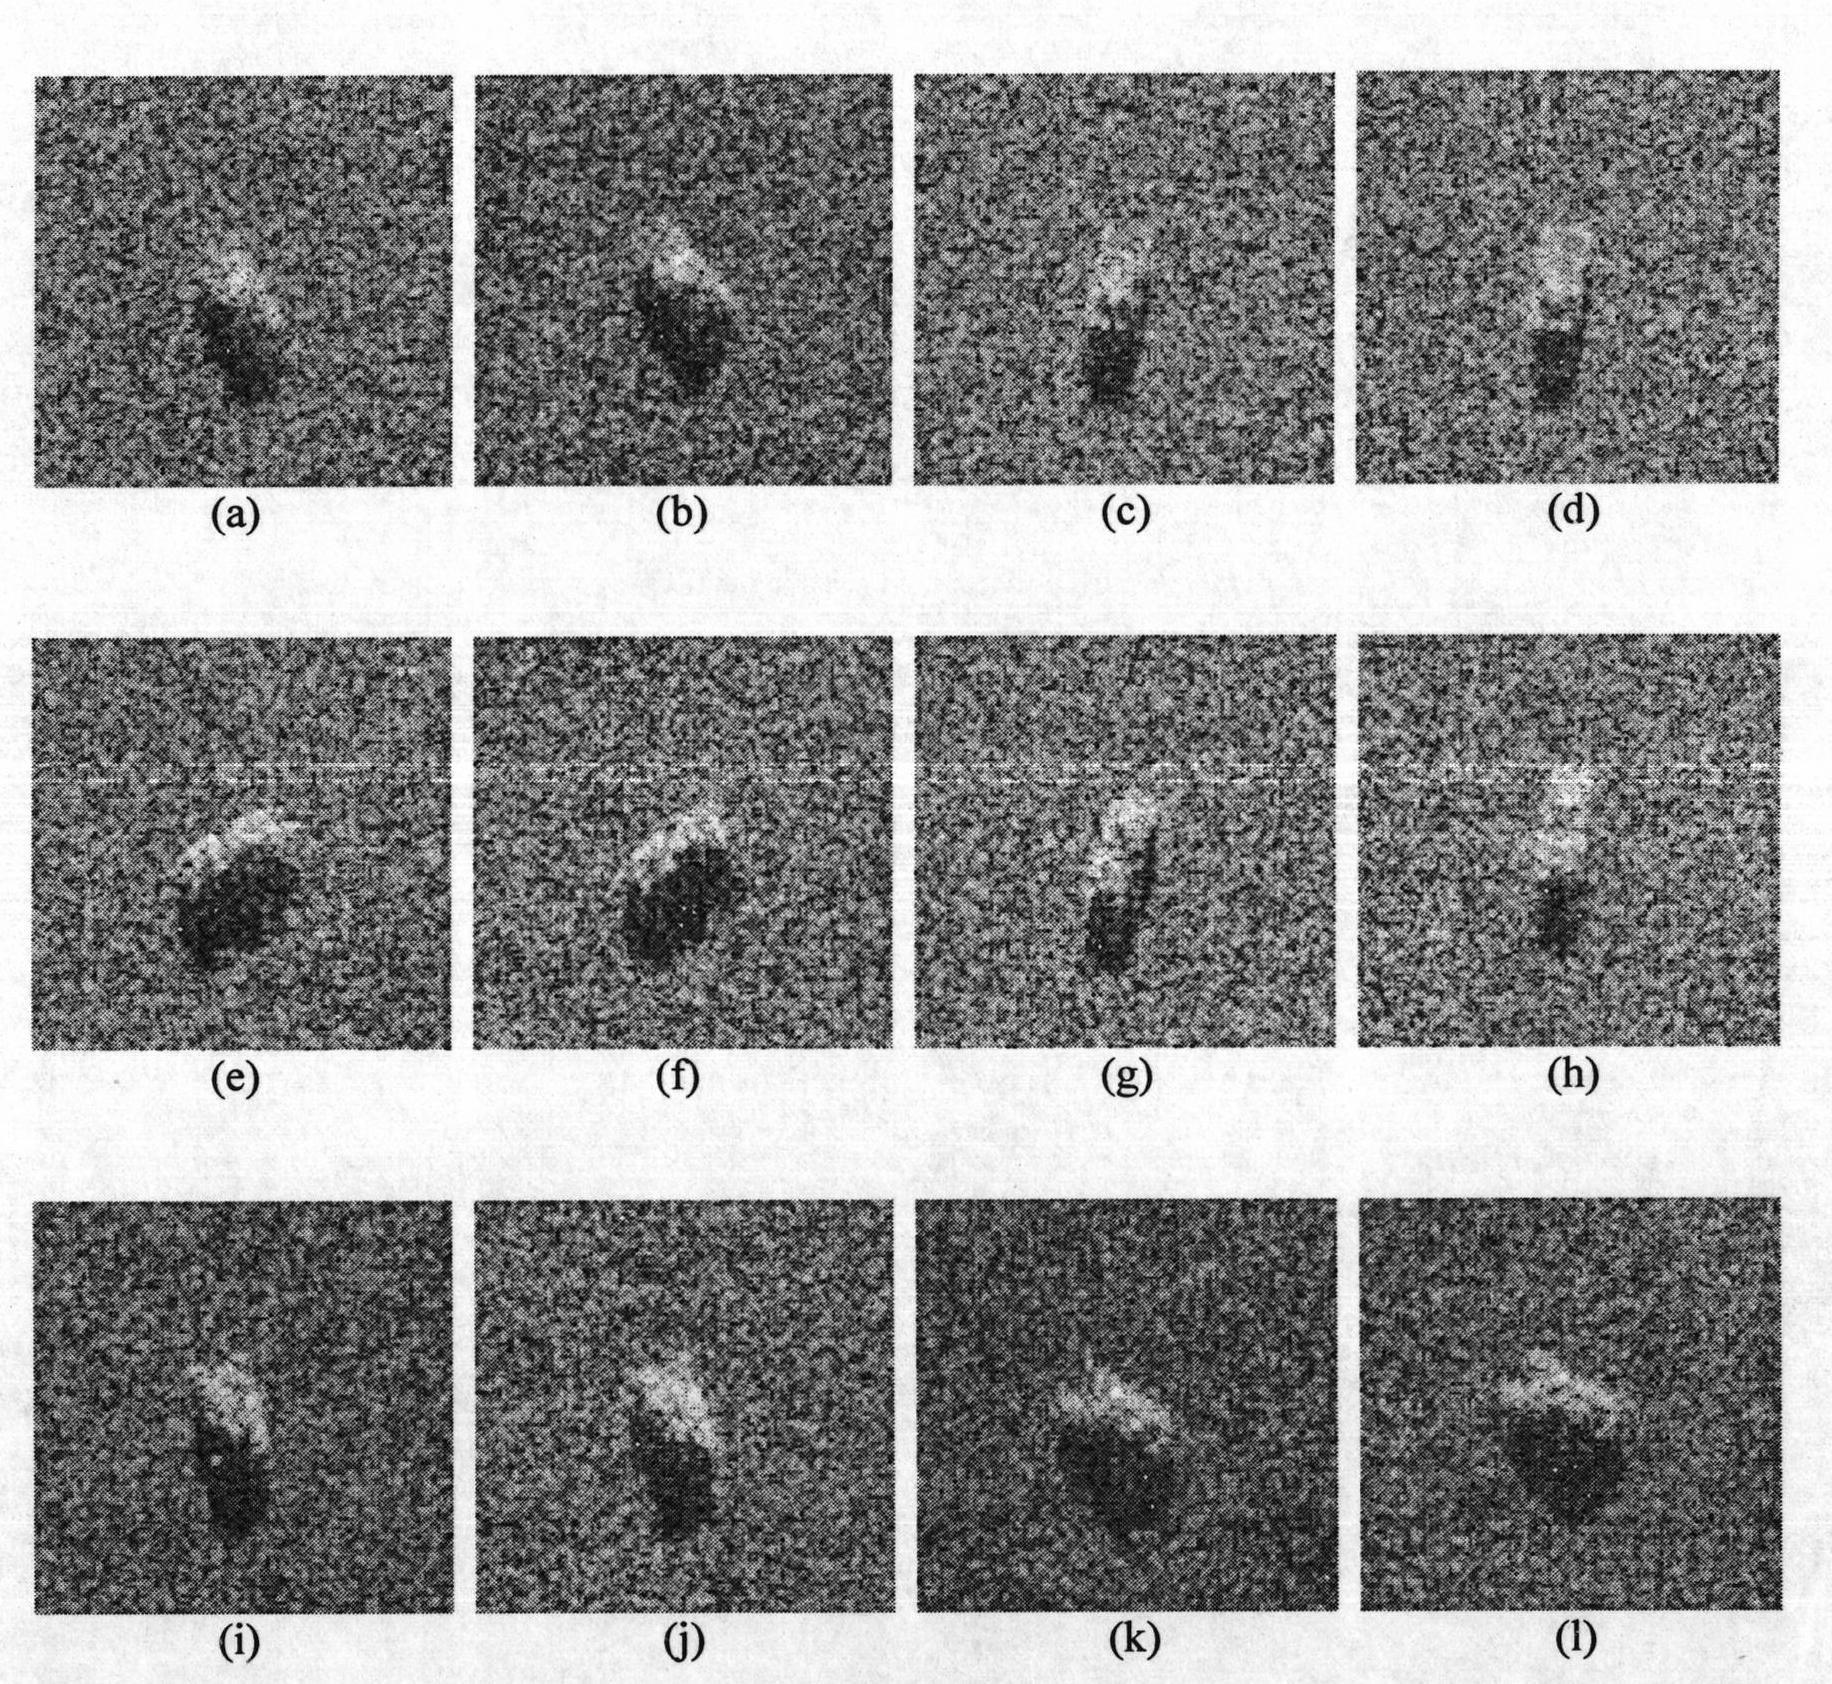 SAR (Synthetic Aperture Radar) image target recognizing method based on nuclear scale tangent dimensionality reduction